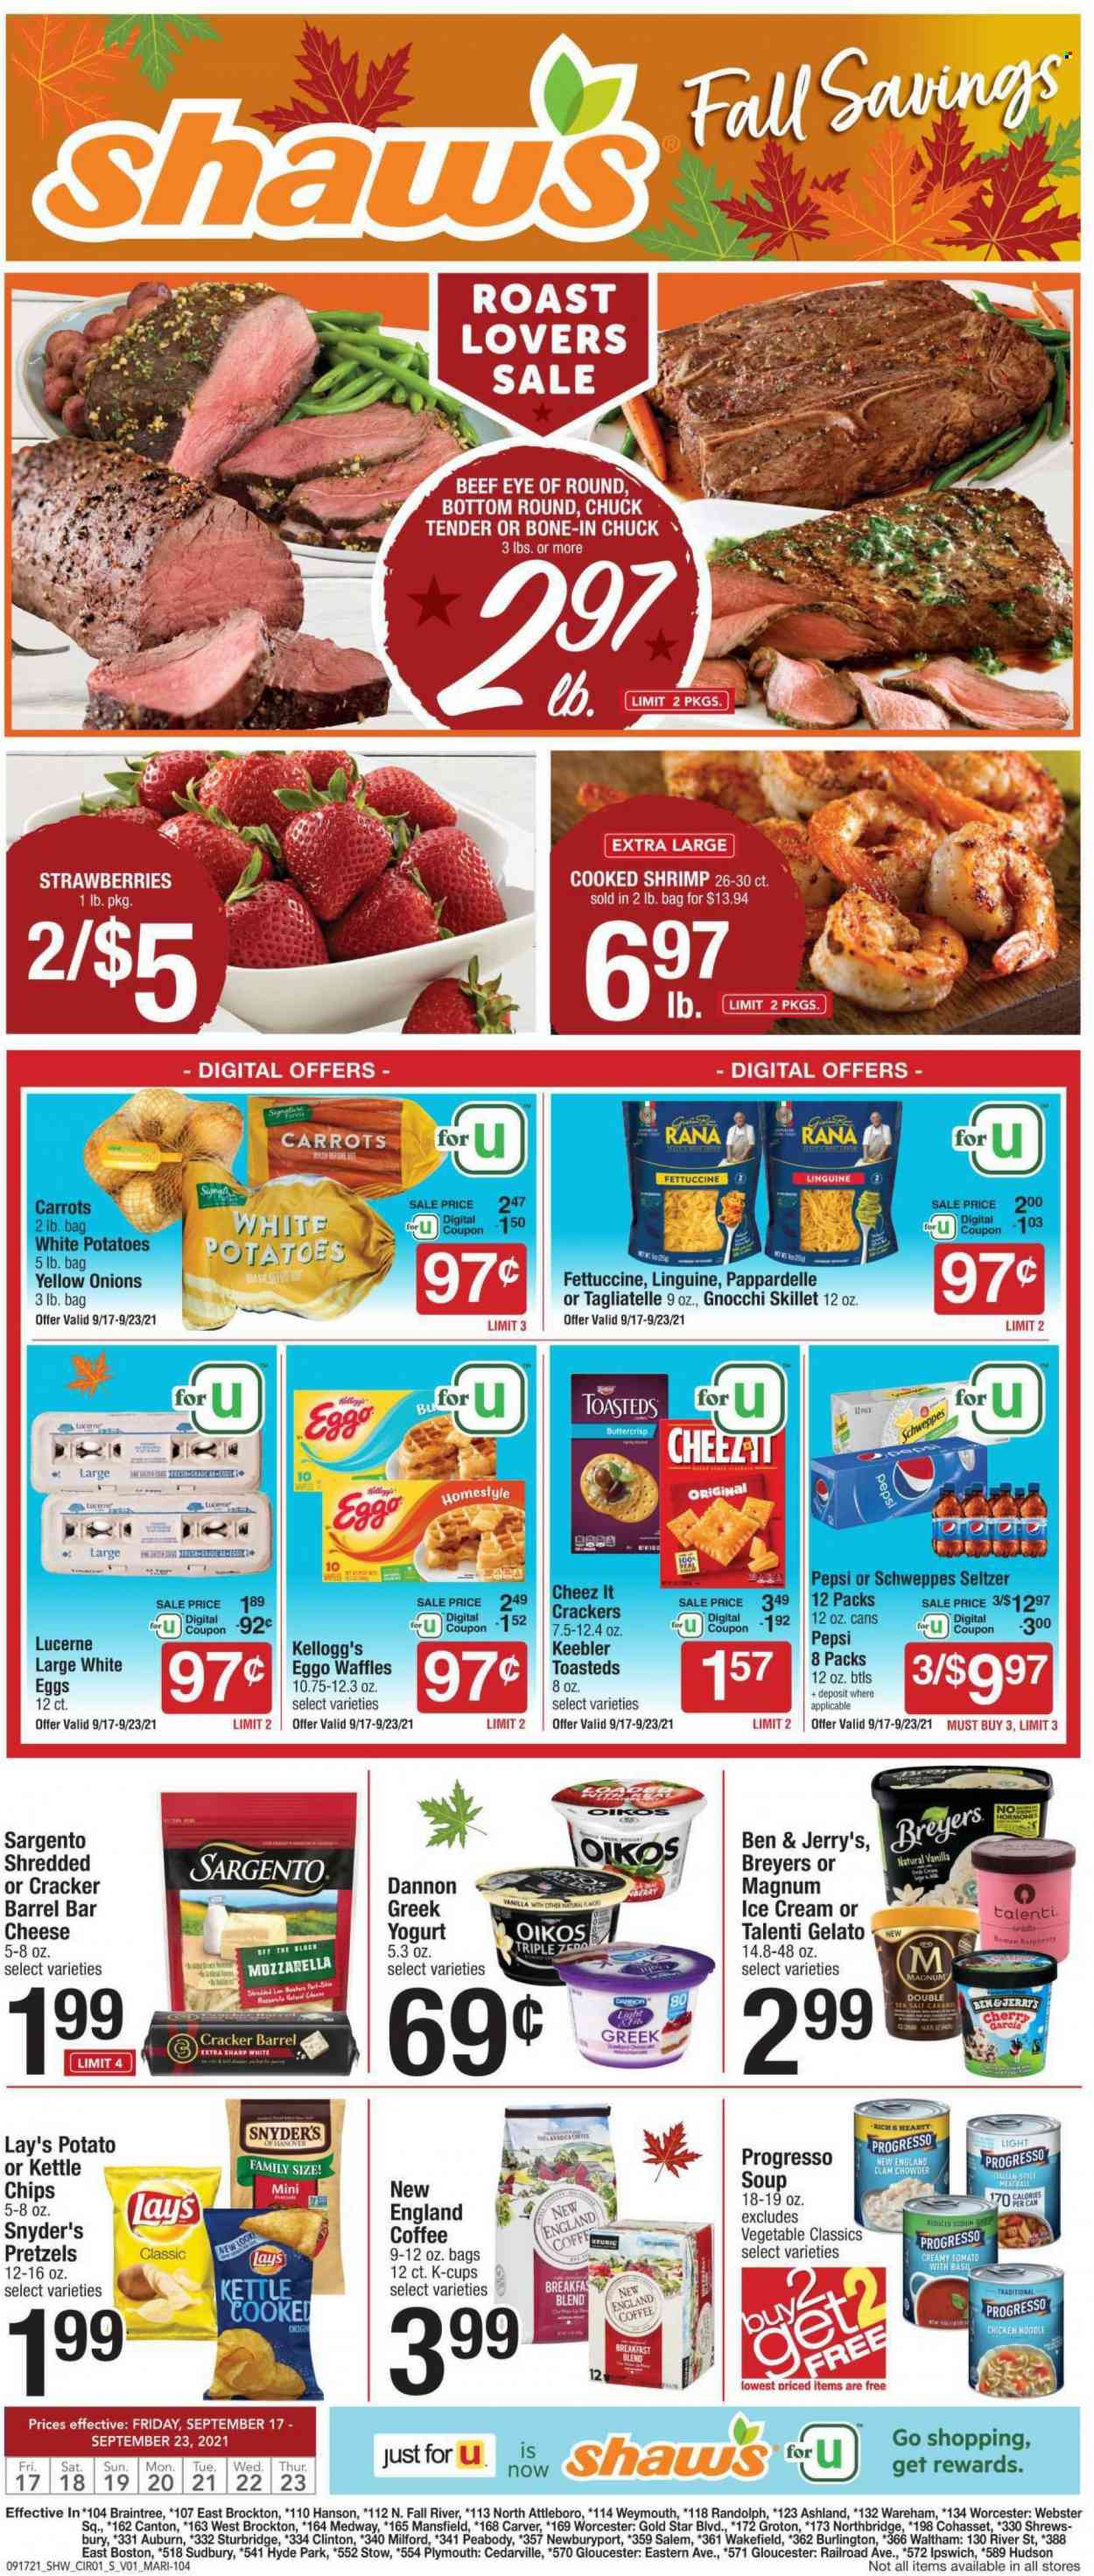 thumbnail - Shaw’s Flyer - 09/17/2021 - 09/23/2021 - Sales products - pretzels, waffles, carrots, potatoes, strawberries, shrimps, gnocchi, noodles, Progresso, Giovanni Rana, Rana, cheese, Sargento, yoghurt, Oikos, Dannon, eggs, ice cream, Ben & Jerry's, Talenti Gelato, gelato, crackers, Kellogg's, Keebler, chips, Lay’s, clam chowder, esponja, Schweppes, Pepsi, seltzer water, coffee, coffee capsules, K-Cups, breakfast blend, beef meat, eye of round, chuck tender. Page 1.